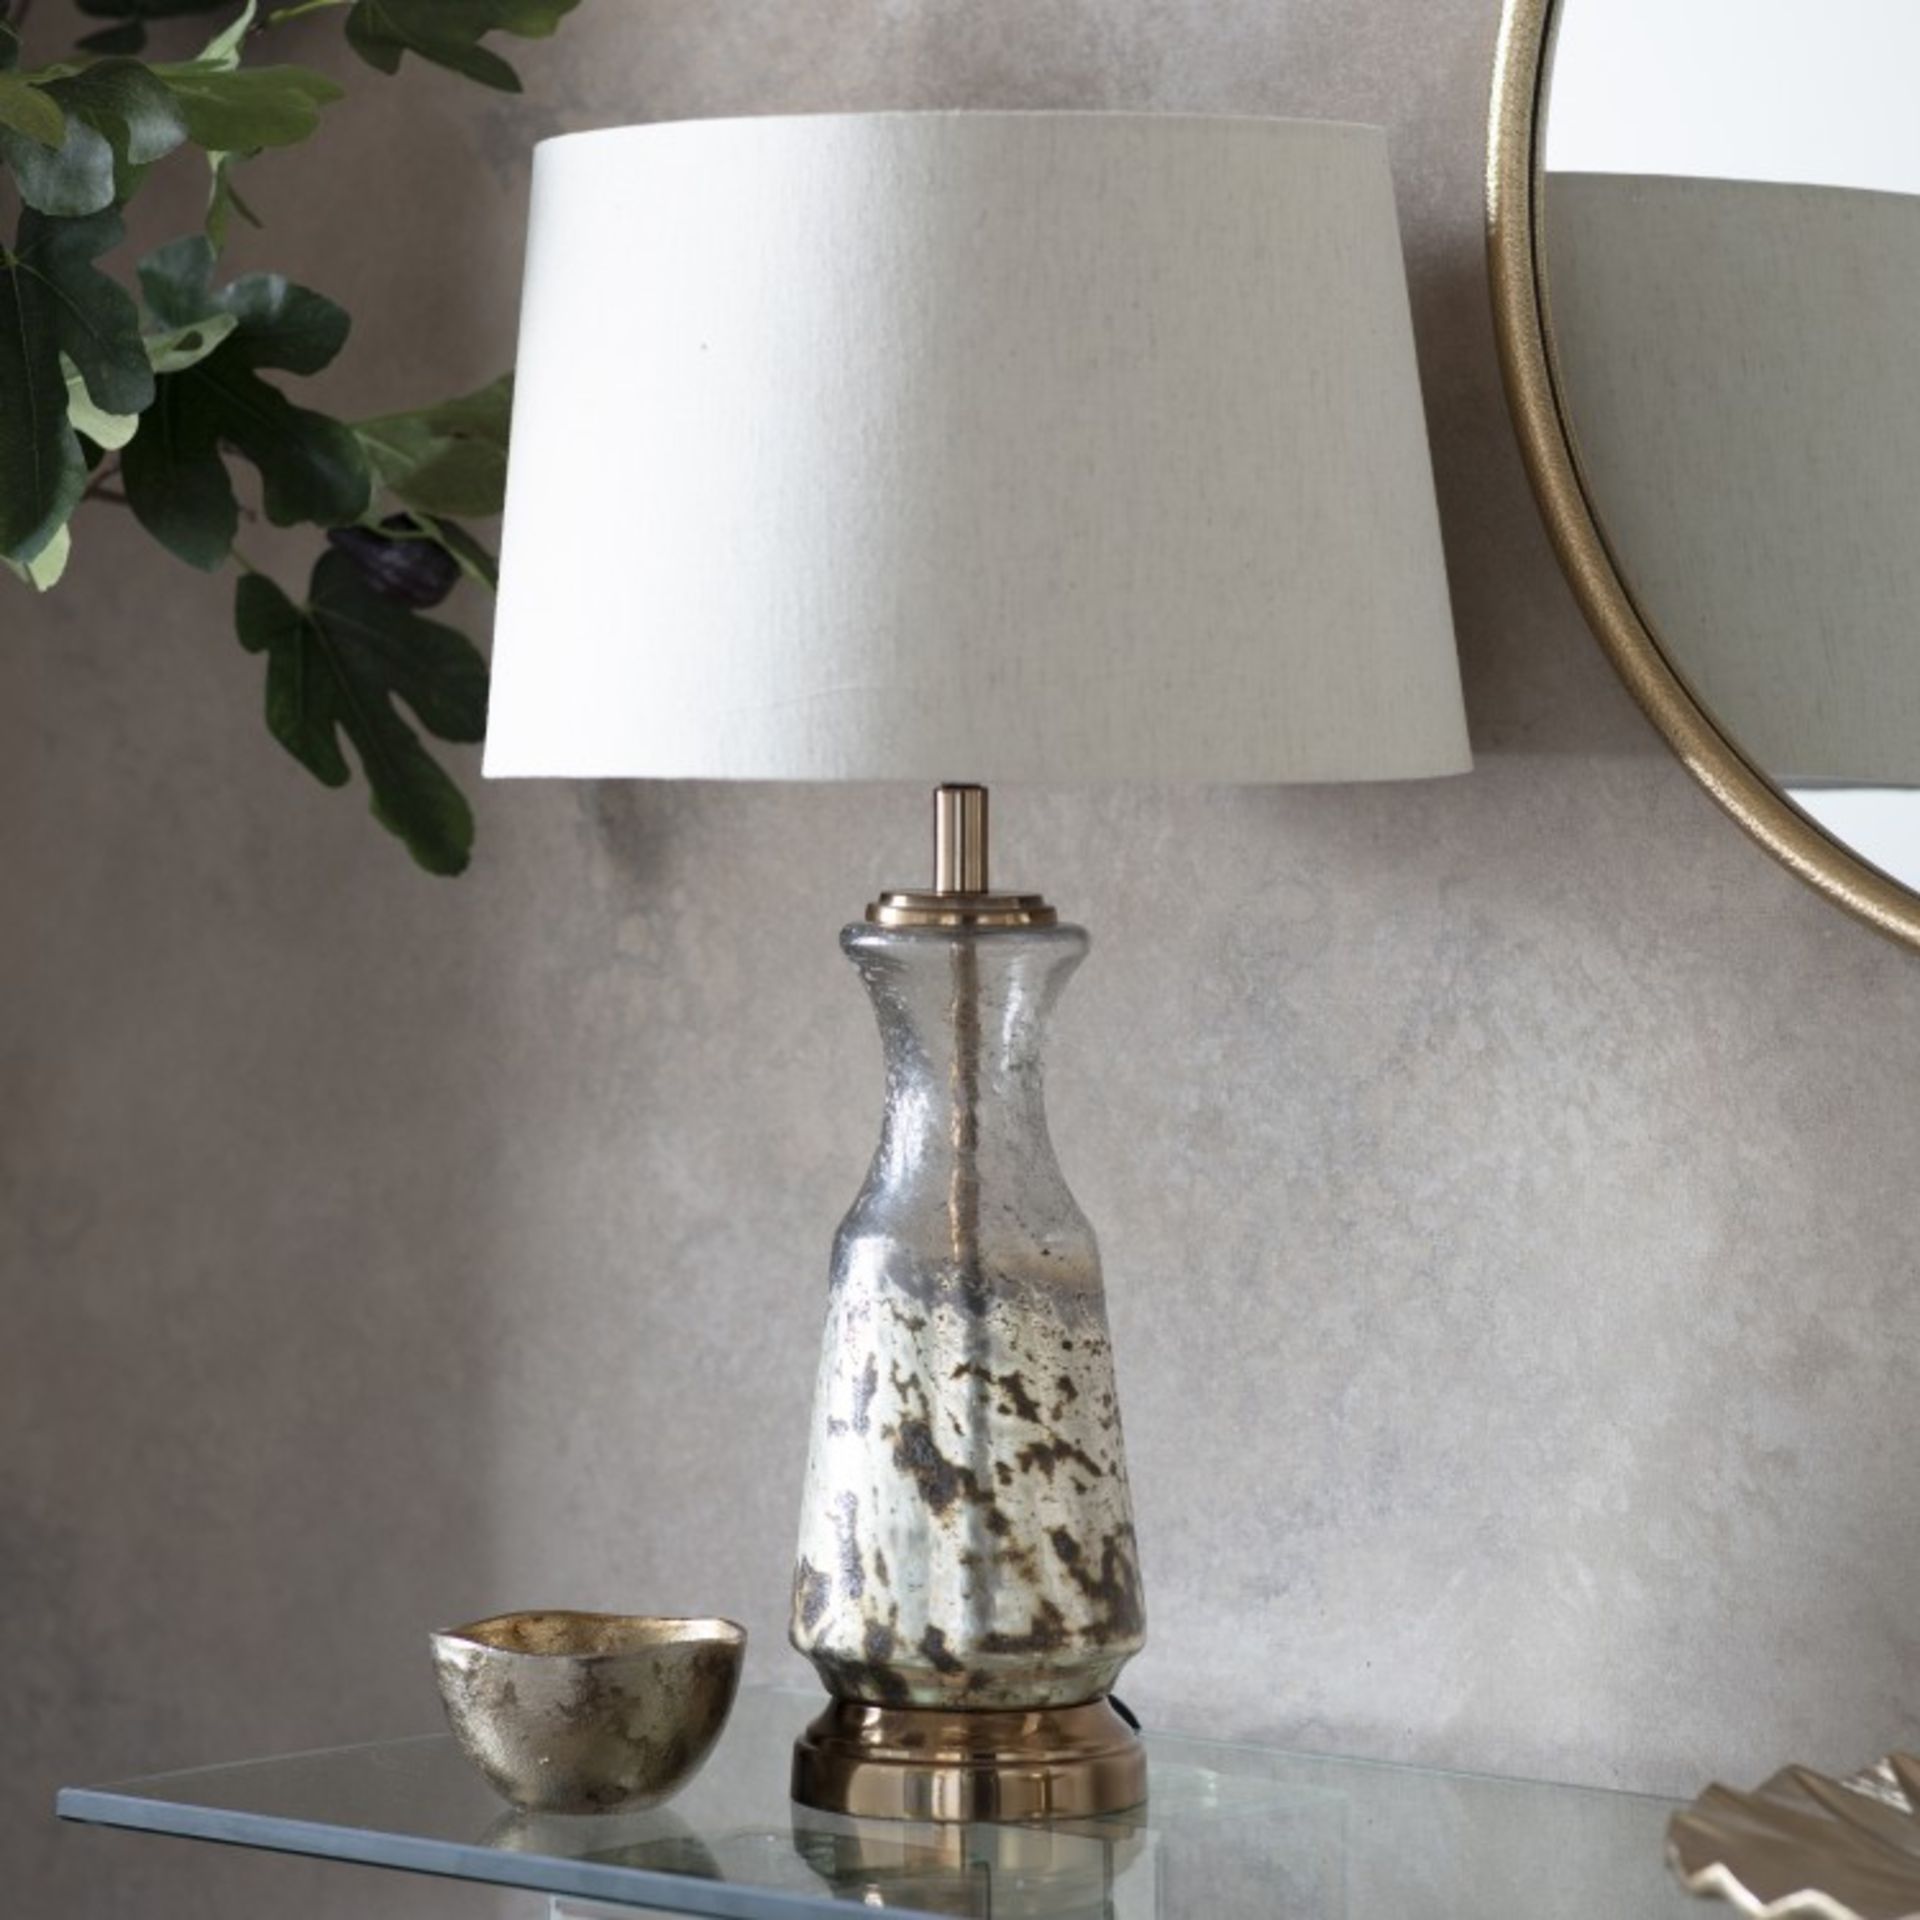 Odyssey Table Lamp Light up any surface with our new table lamps. When turned off, a table lamp